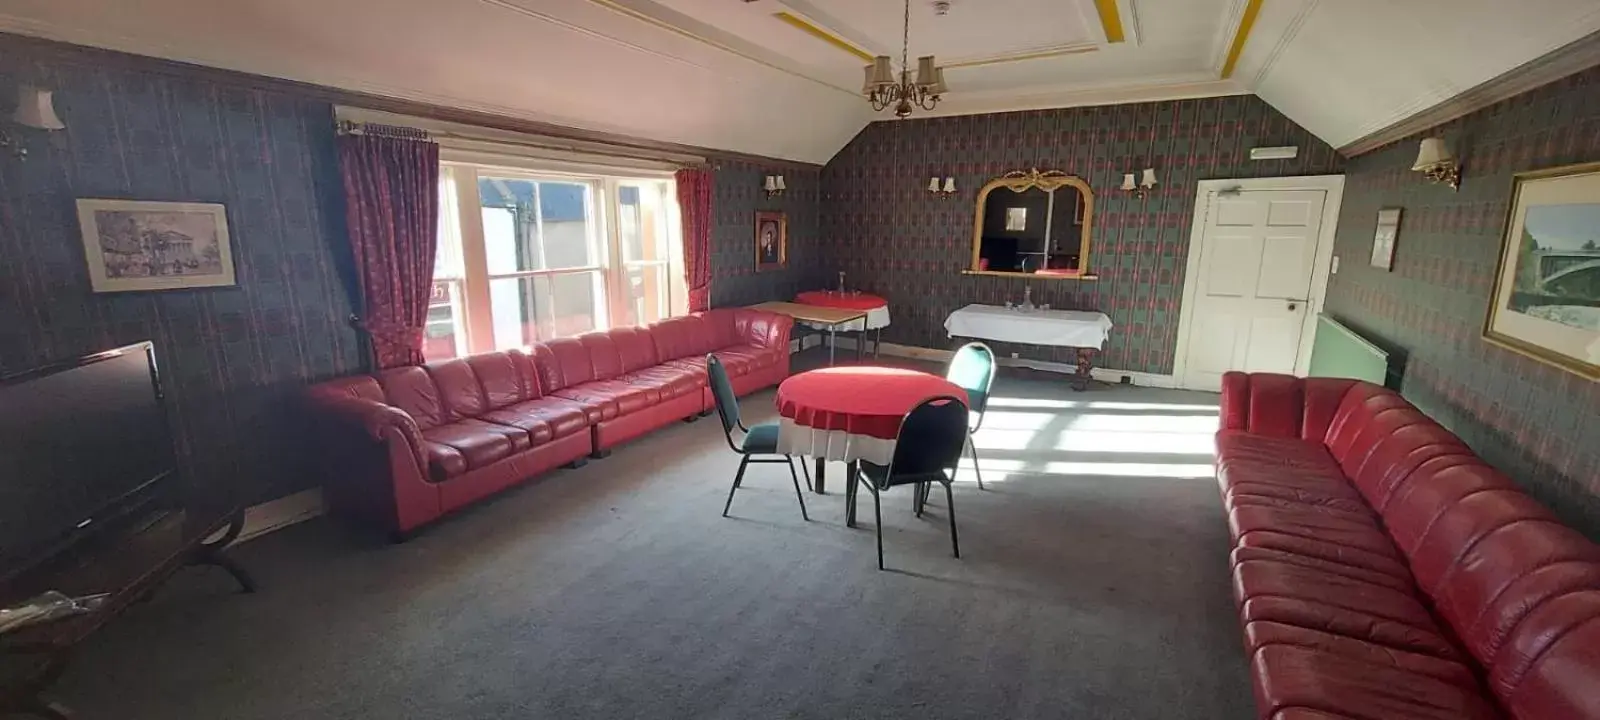 Seating Area in Gordon Arms Hotel